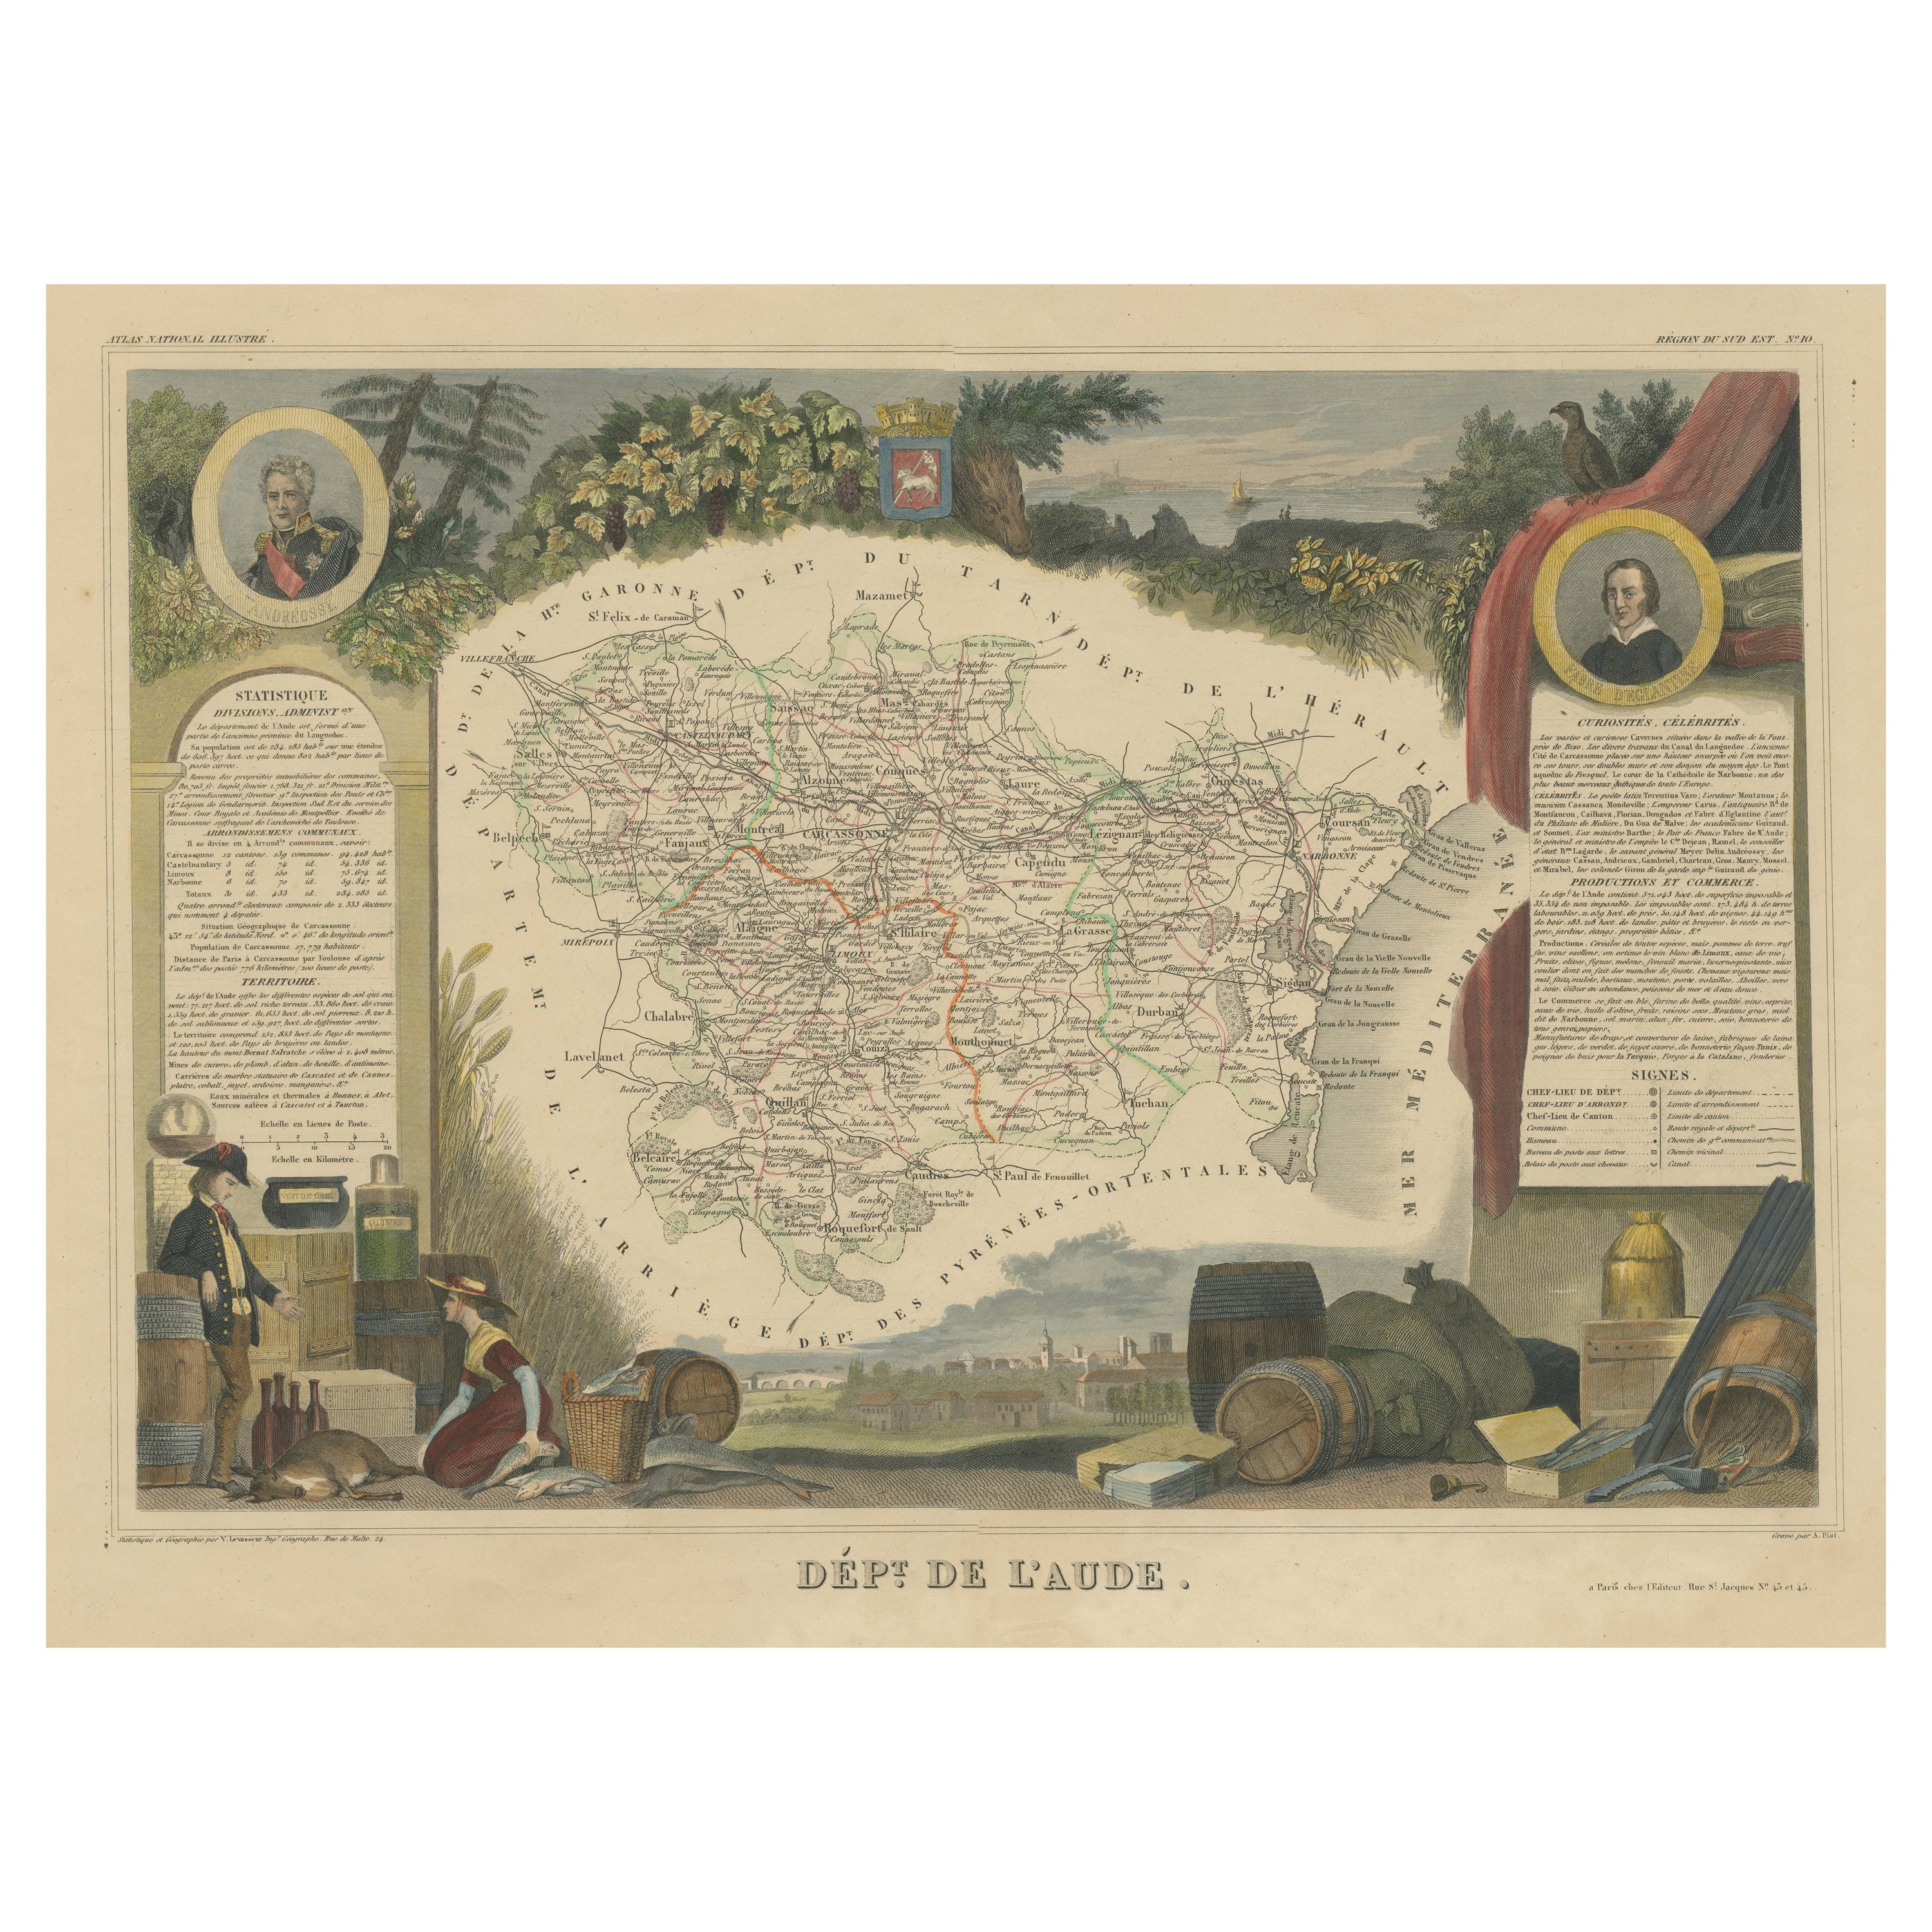 Hand Colored Antique Map of the Department of Aude, France